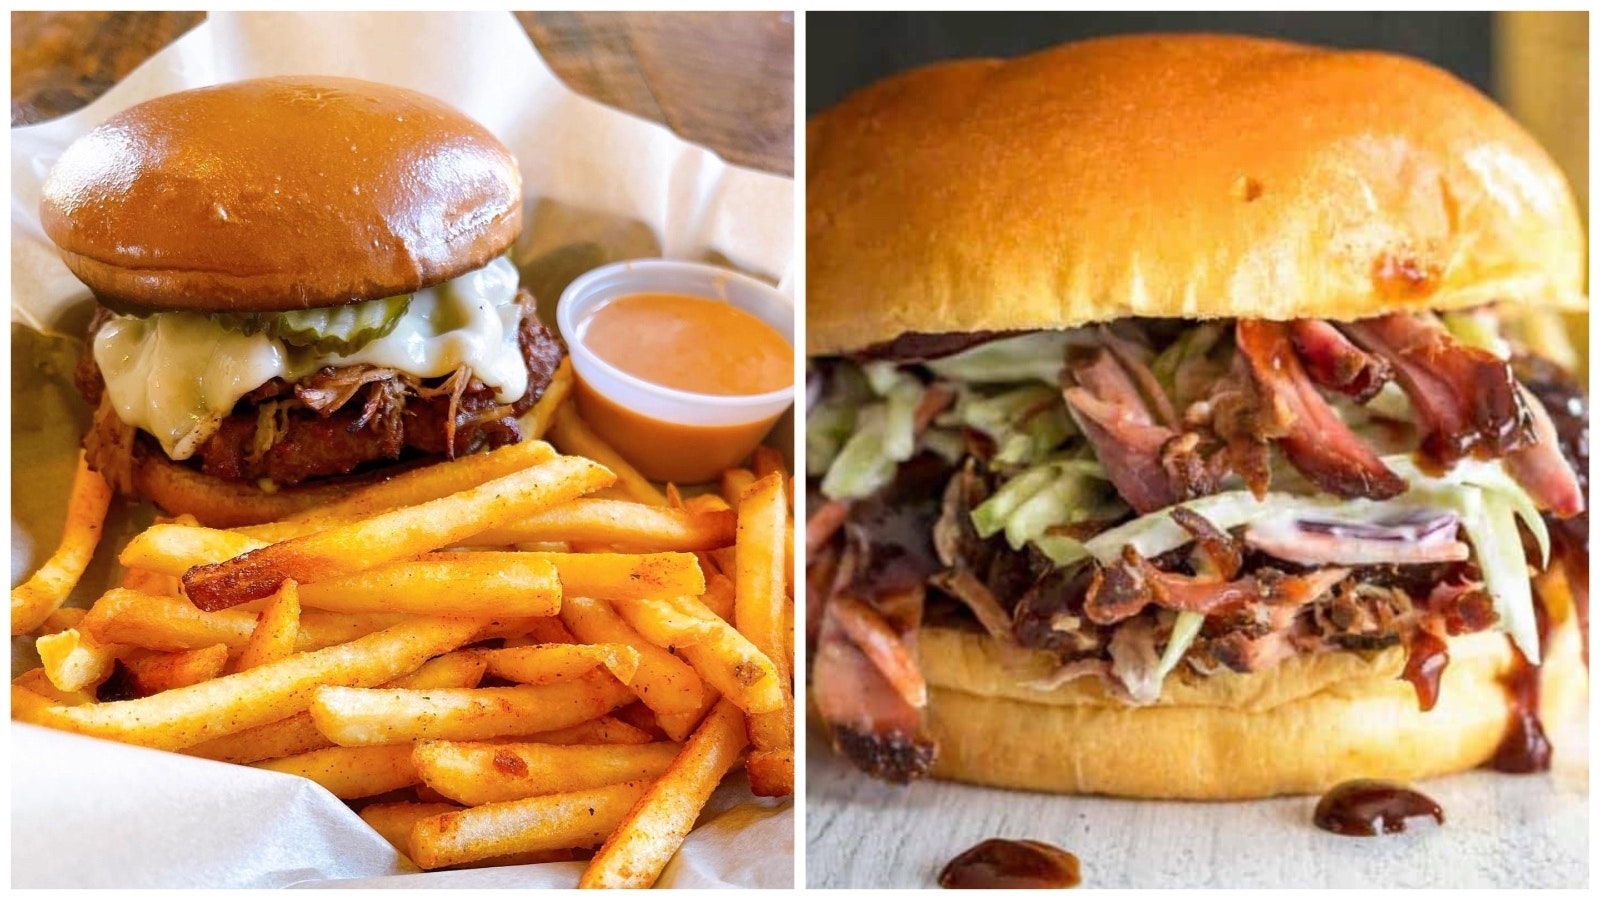 You can get more than sweets at the Shell Store. Try a burger and fries, left, or the whiskey pulled pork.